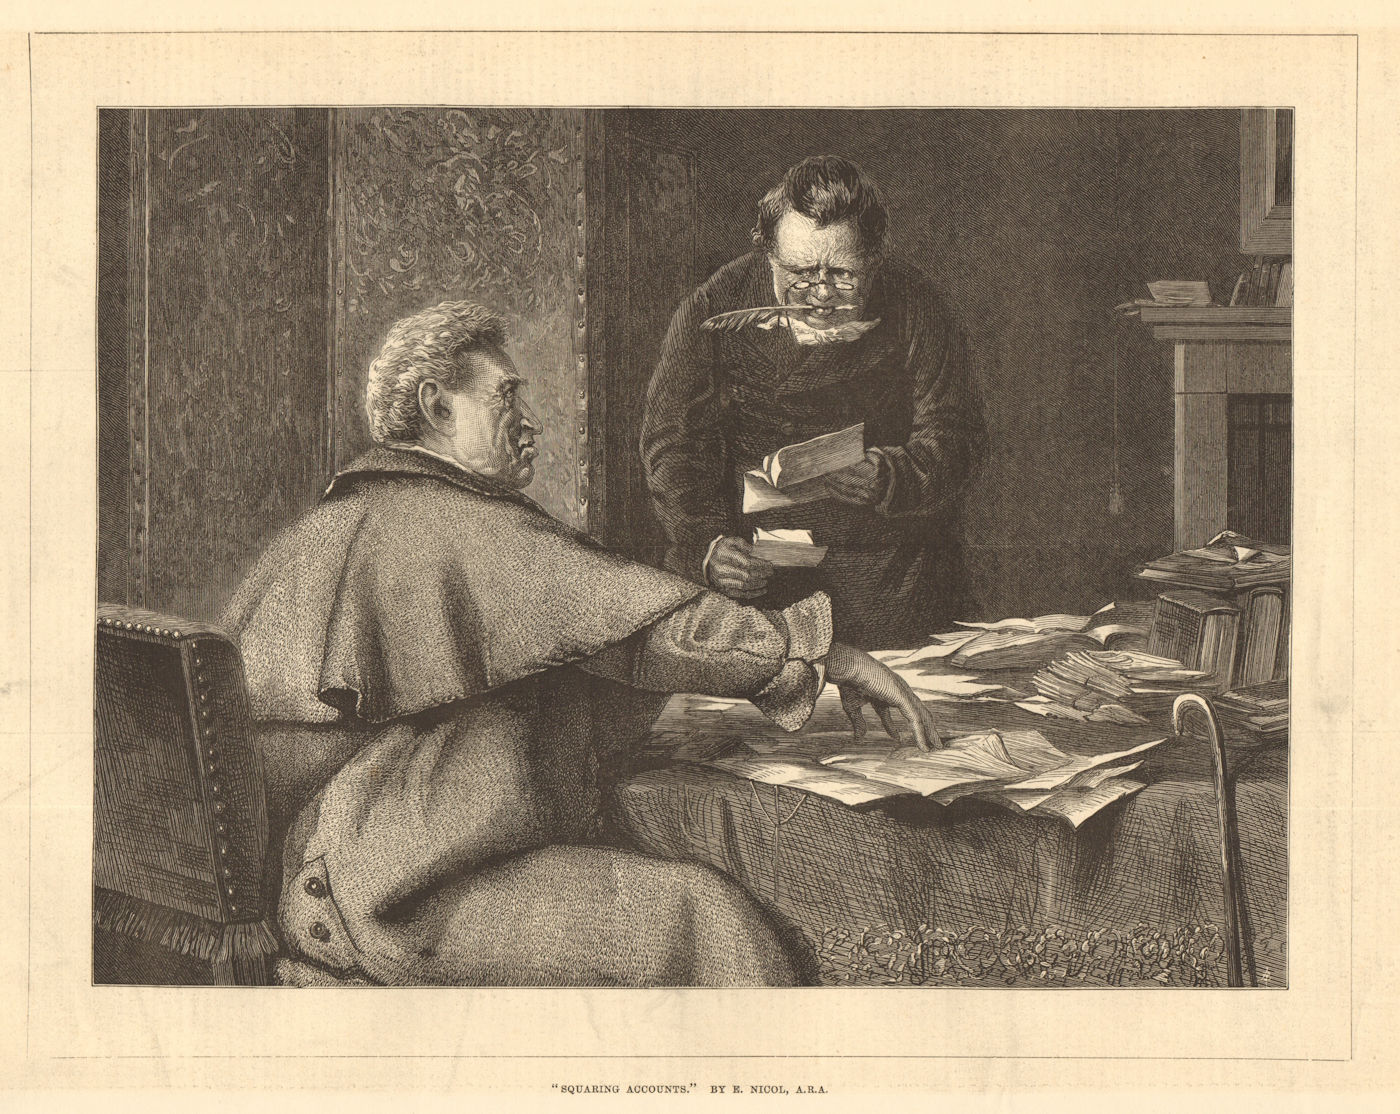 "Squaring accounts", by E. Nicol, A. R. A. Portraits. Finance Accounting 1876